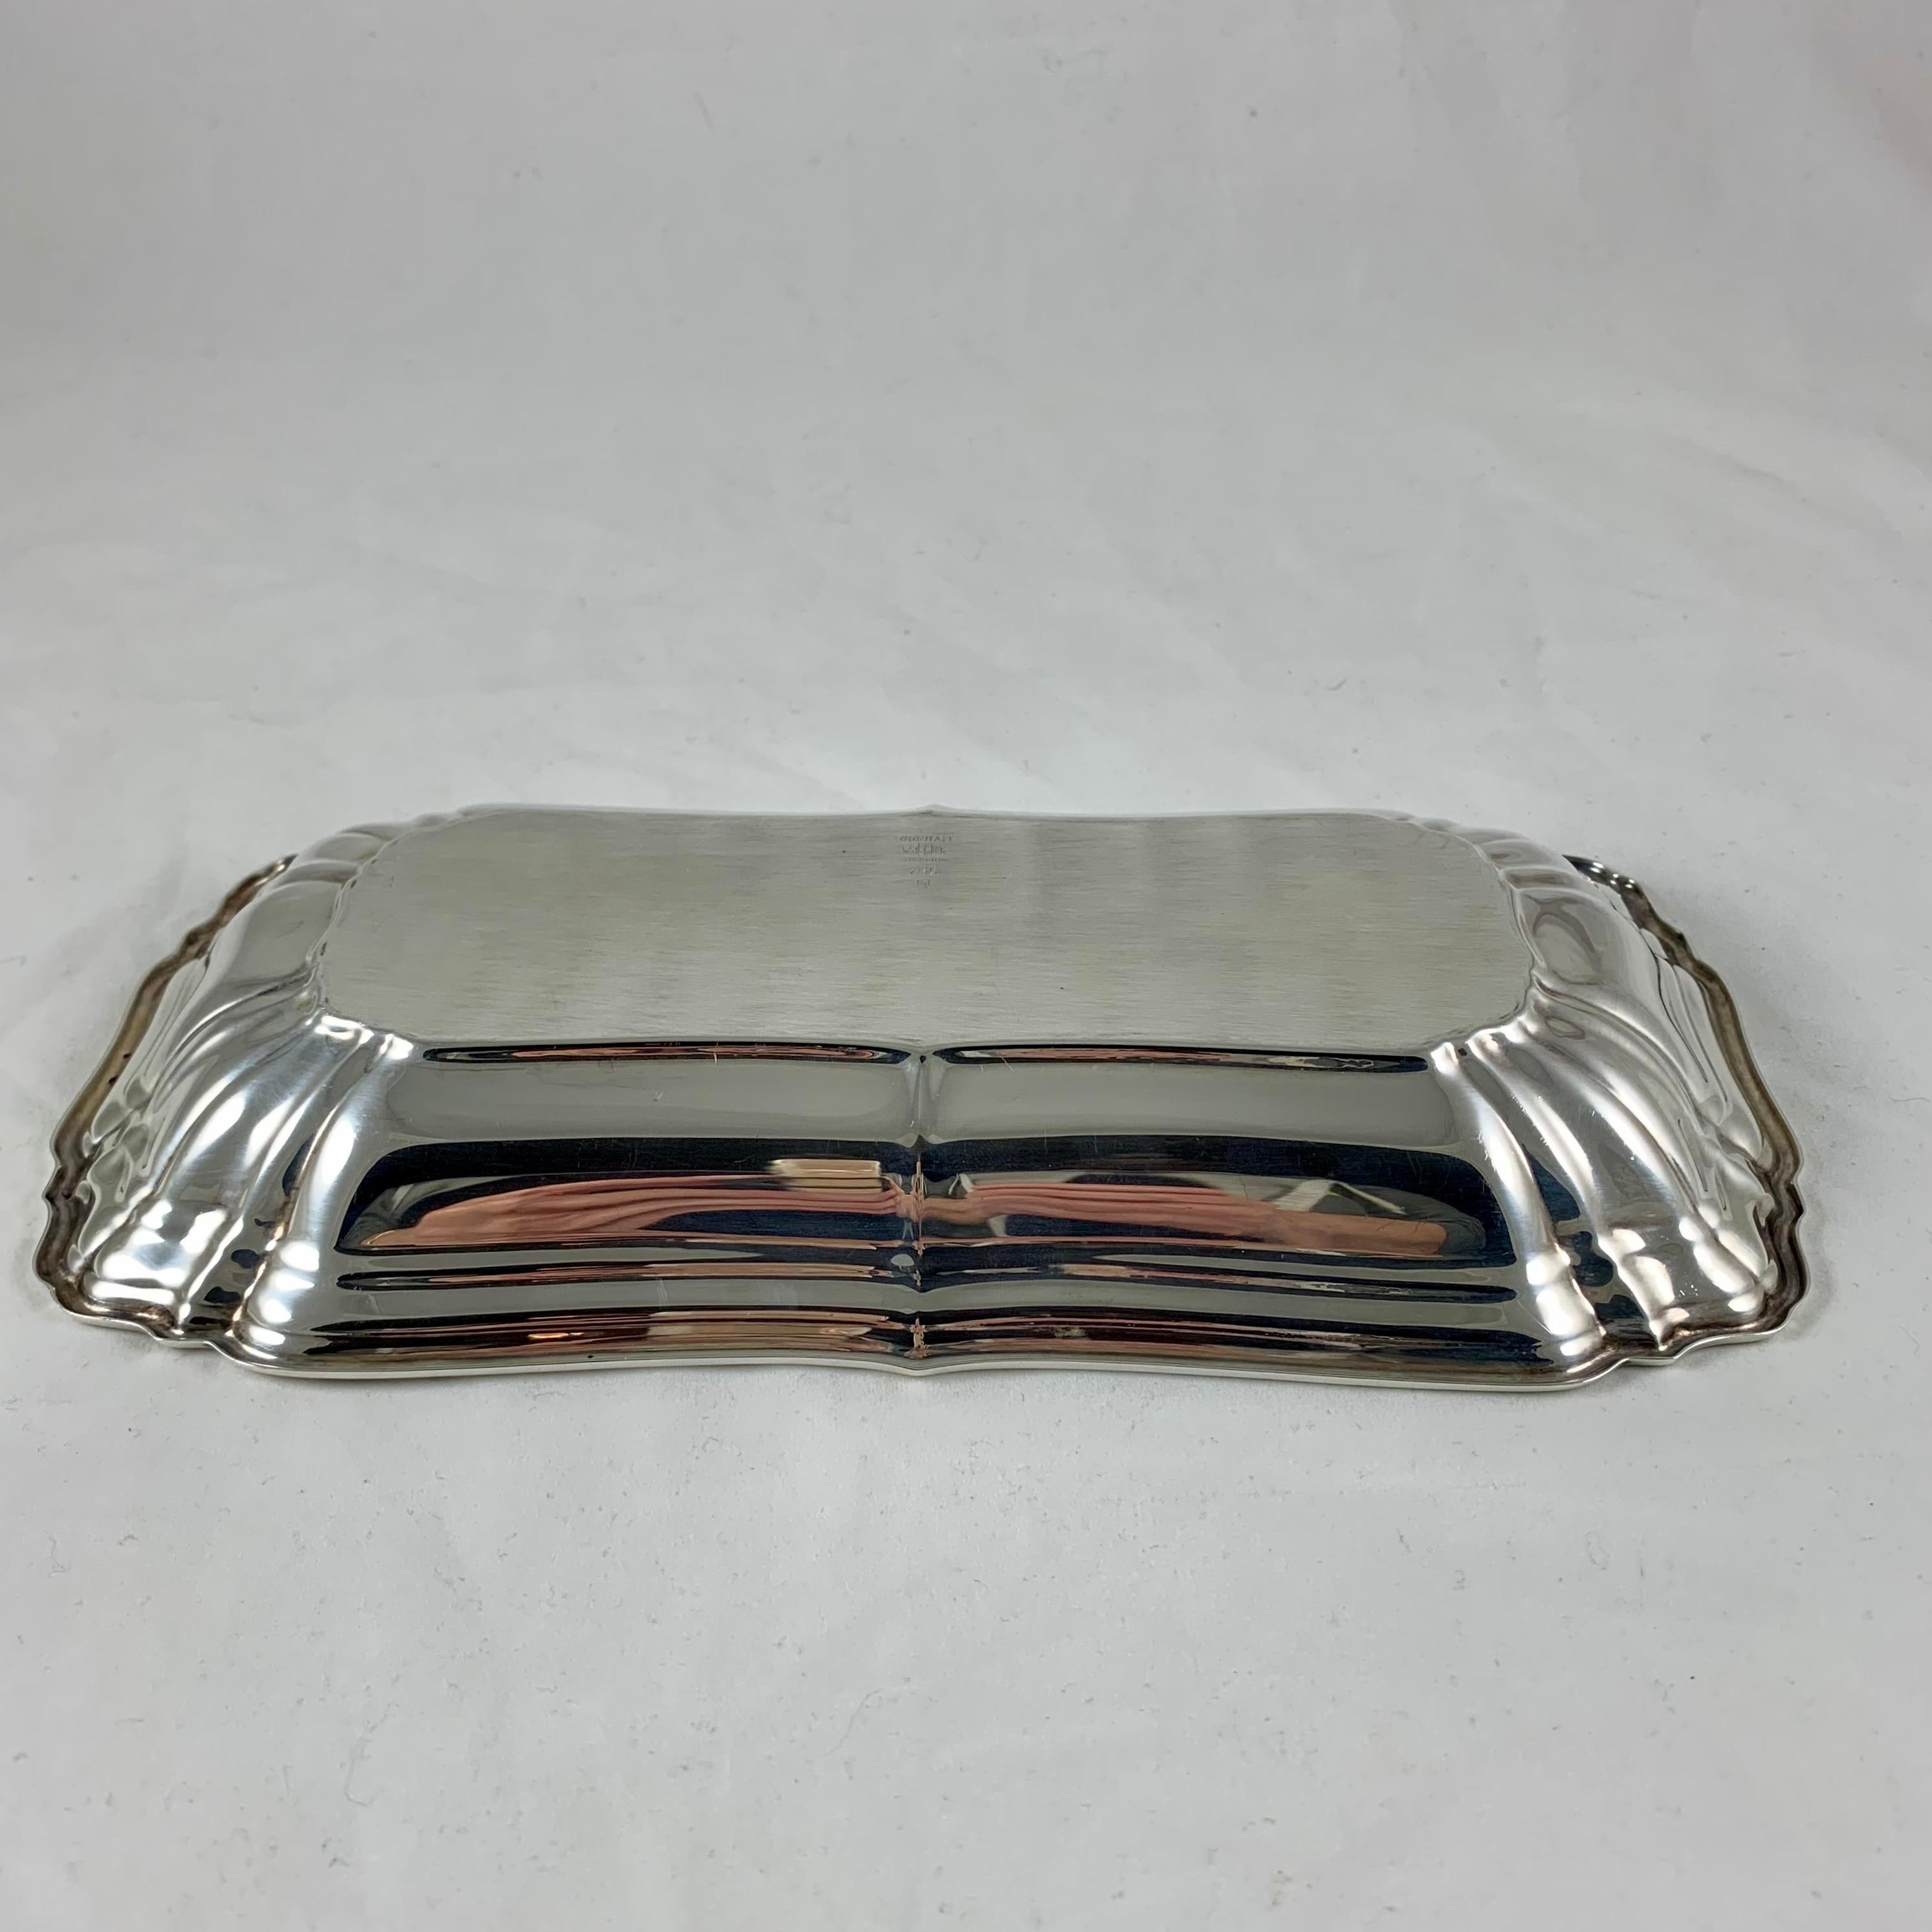 Gorham Sterling Silver Paneled Rectangular Celery or Relish Tray, circa 1940s For Sale 5